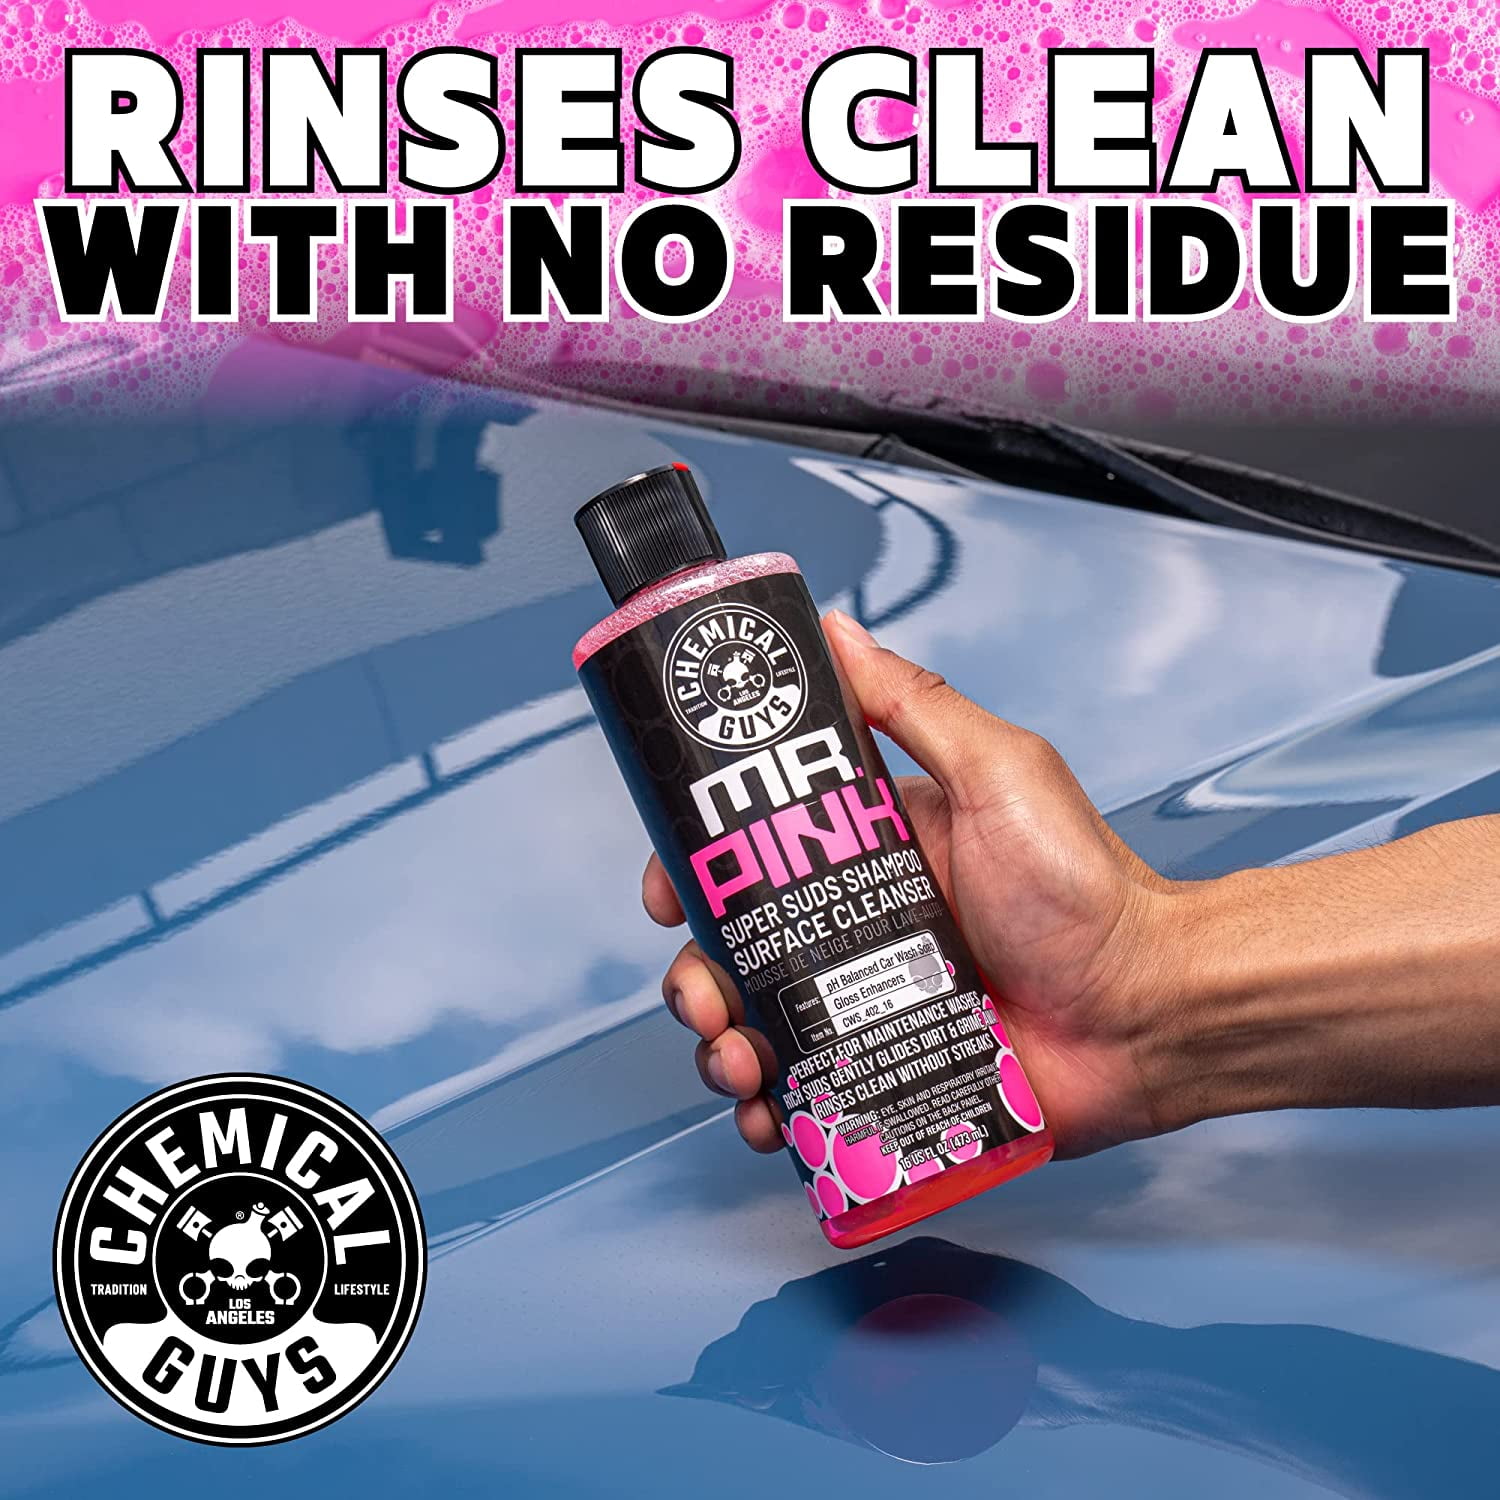  Chemical Guys CWS_402_64 Mr. Pink Foaming Car Wash Soap Safe  for Cars, Trucks, Motorcycles, RVs & More, 64 fl oz, Candy Scent & SPI22016  Total Interior Cleaner and Protectant, 16 fl